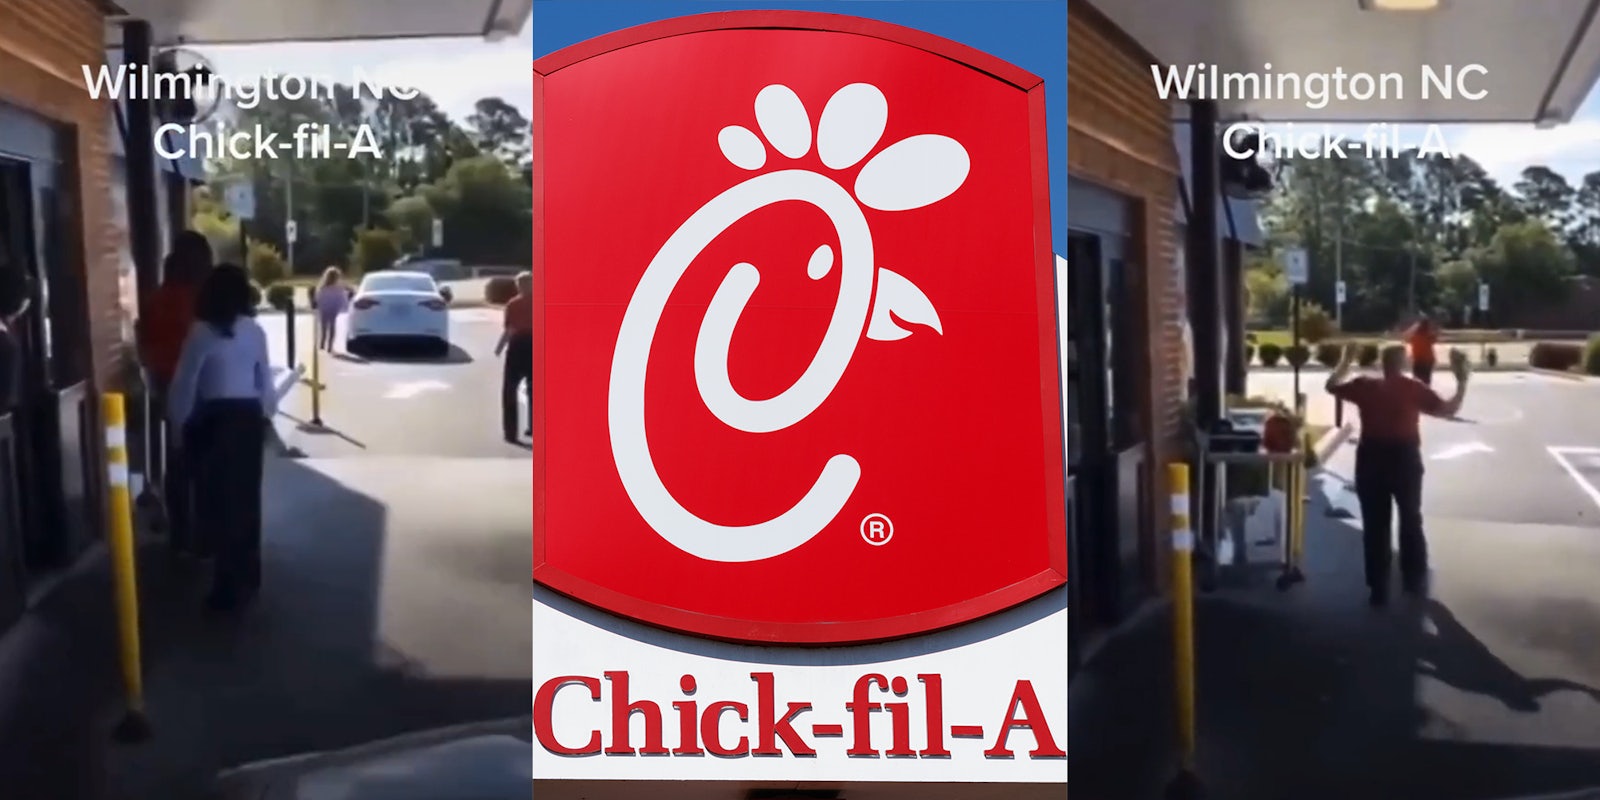 woman chasing car in drive thru (l) chick-fil-A sign (c) workers with hands raised in drive thru (r) with caption 'Wilmington NC Chick-fil-A'